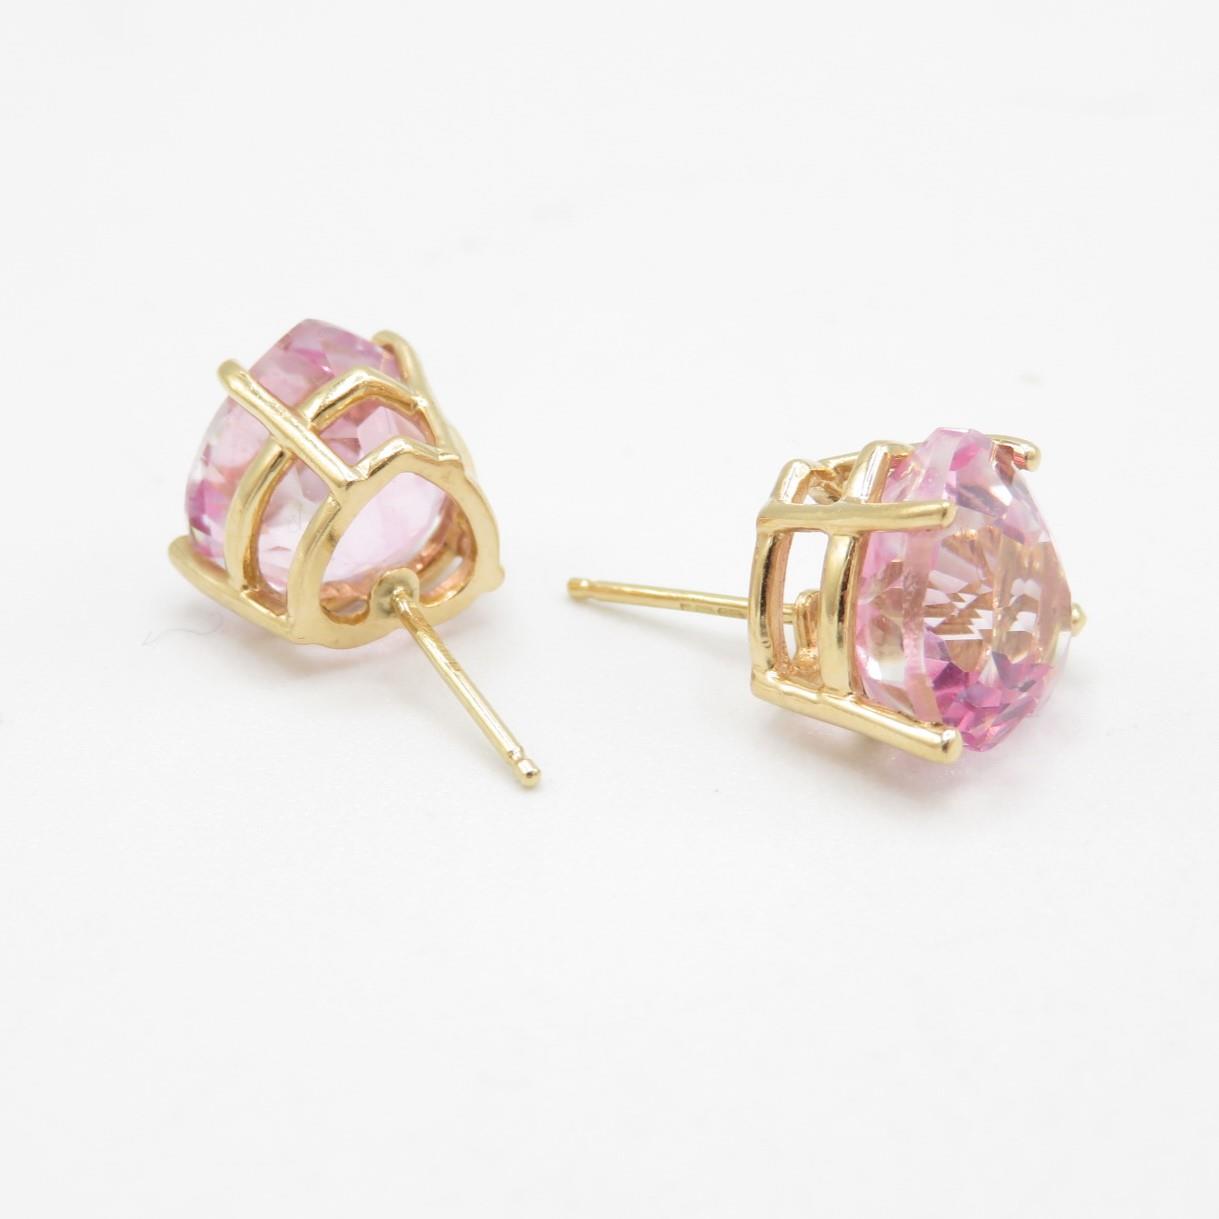 HM 9ct gold stud earrings with large pink paste stones (4.1g) - Image 3 of 4